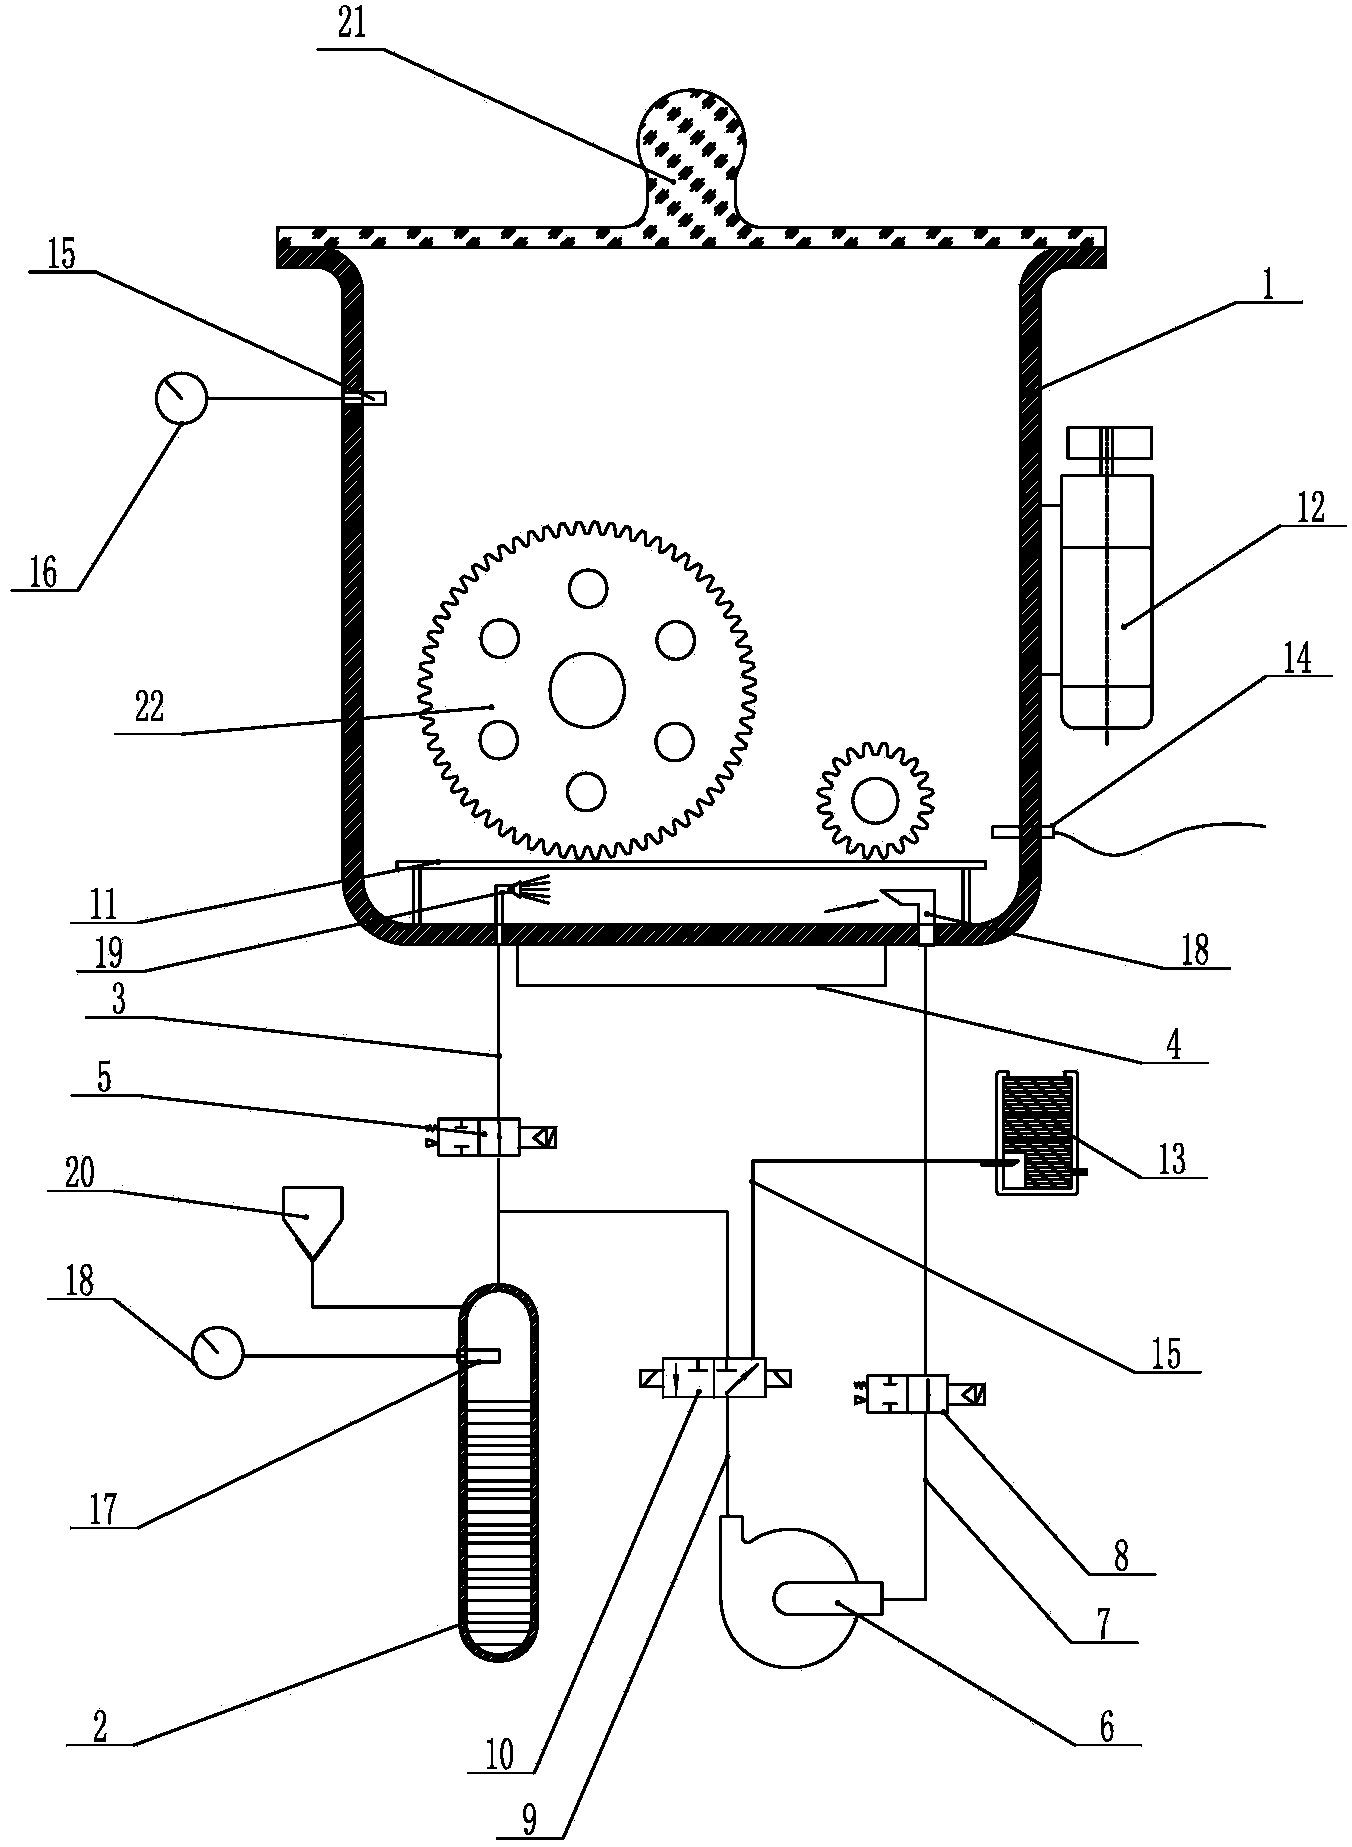 Apparatus and method for polishing three-dimensional printed plastic/resin pieces